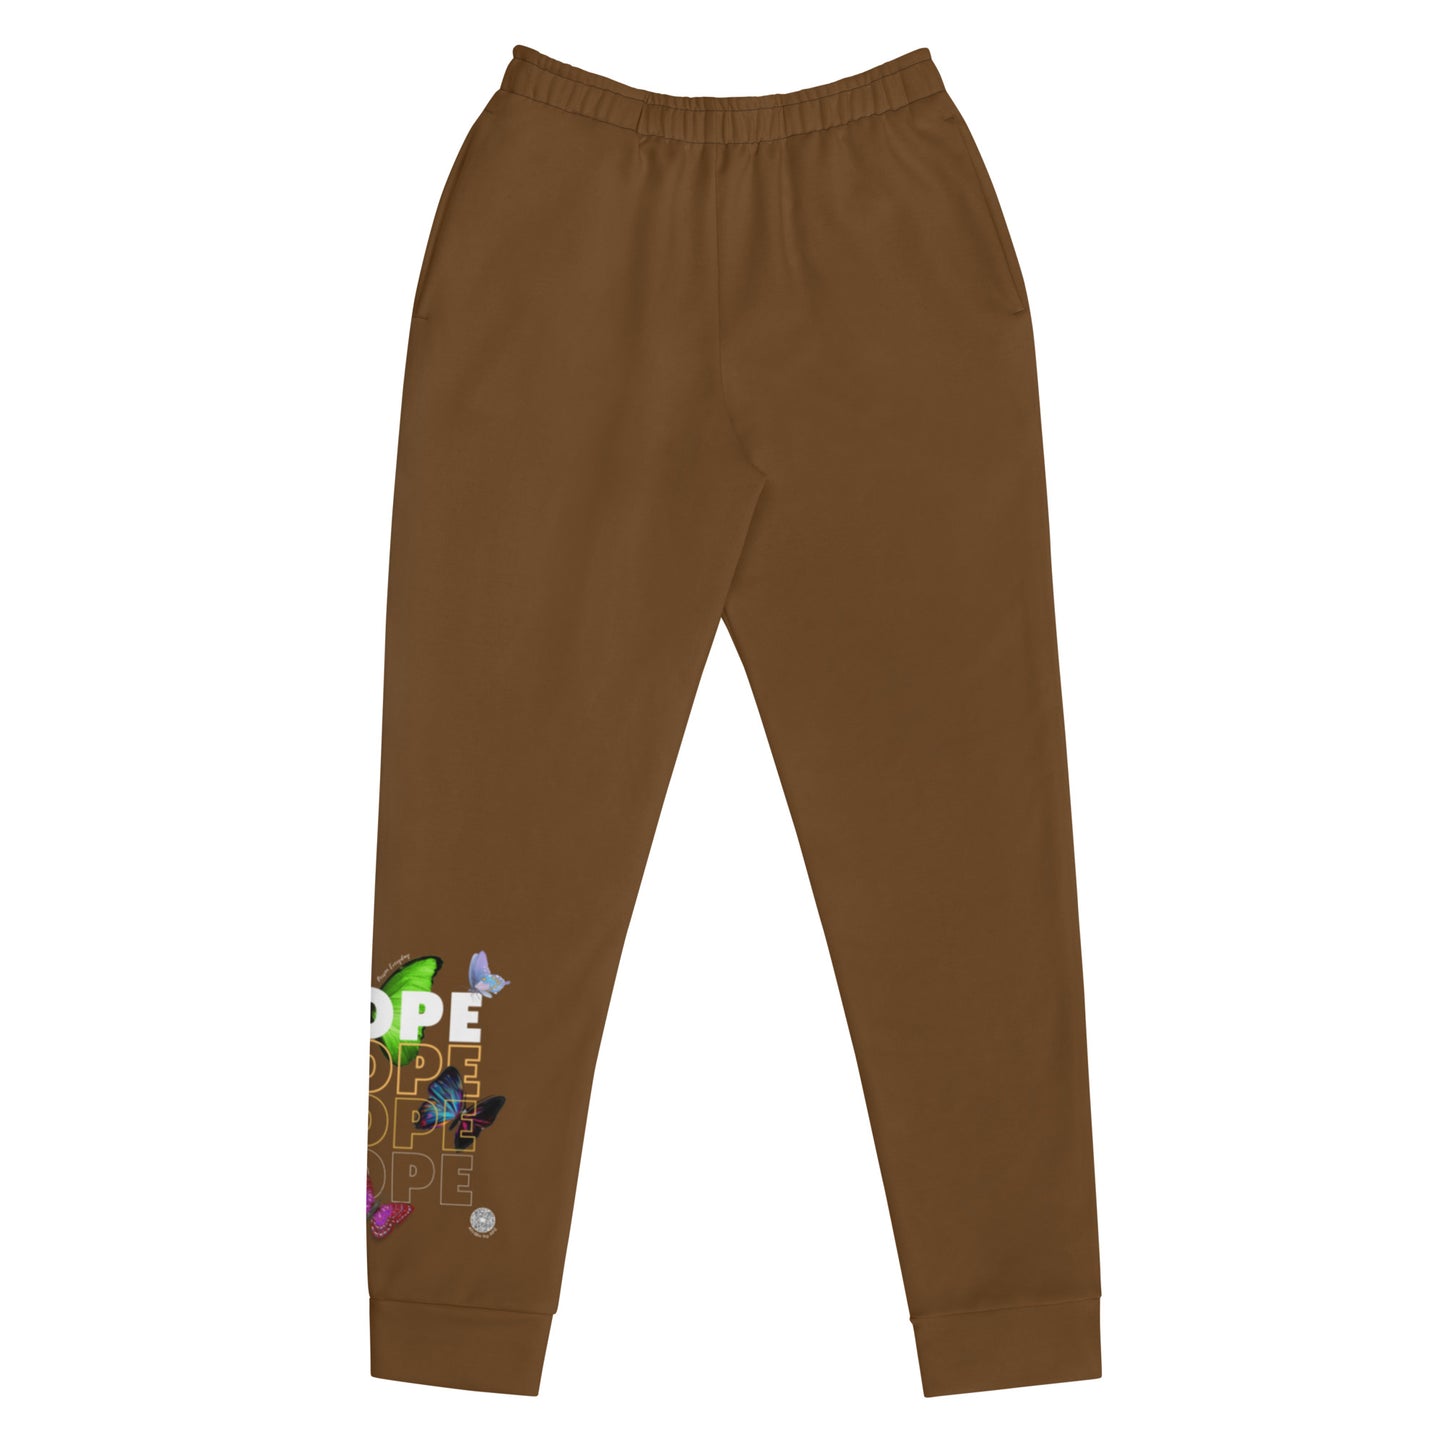 Hope Brown Nude Women's Joggers